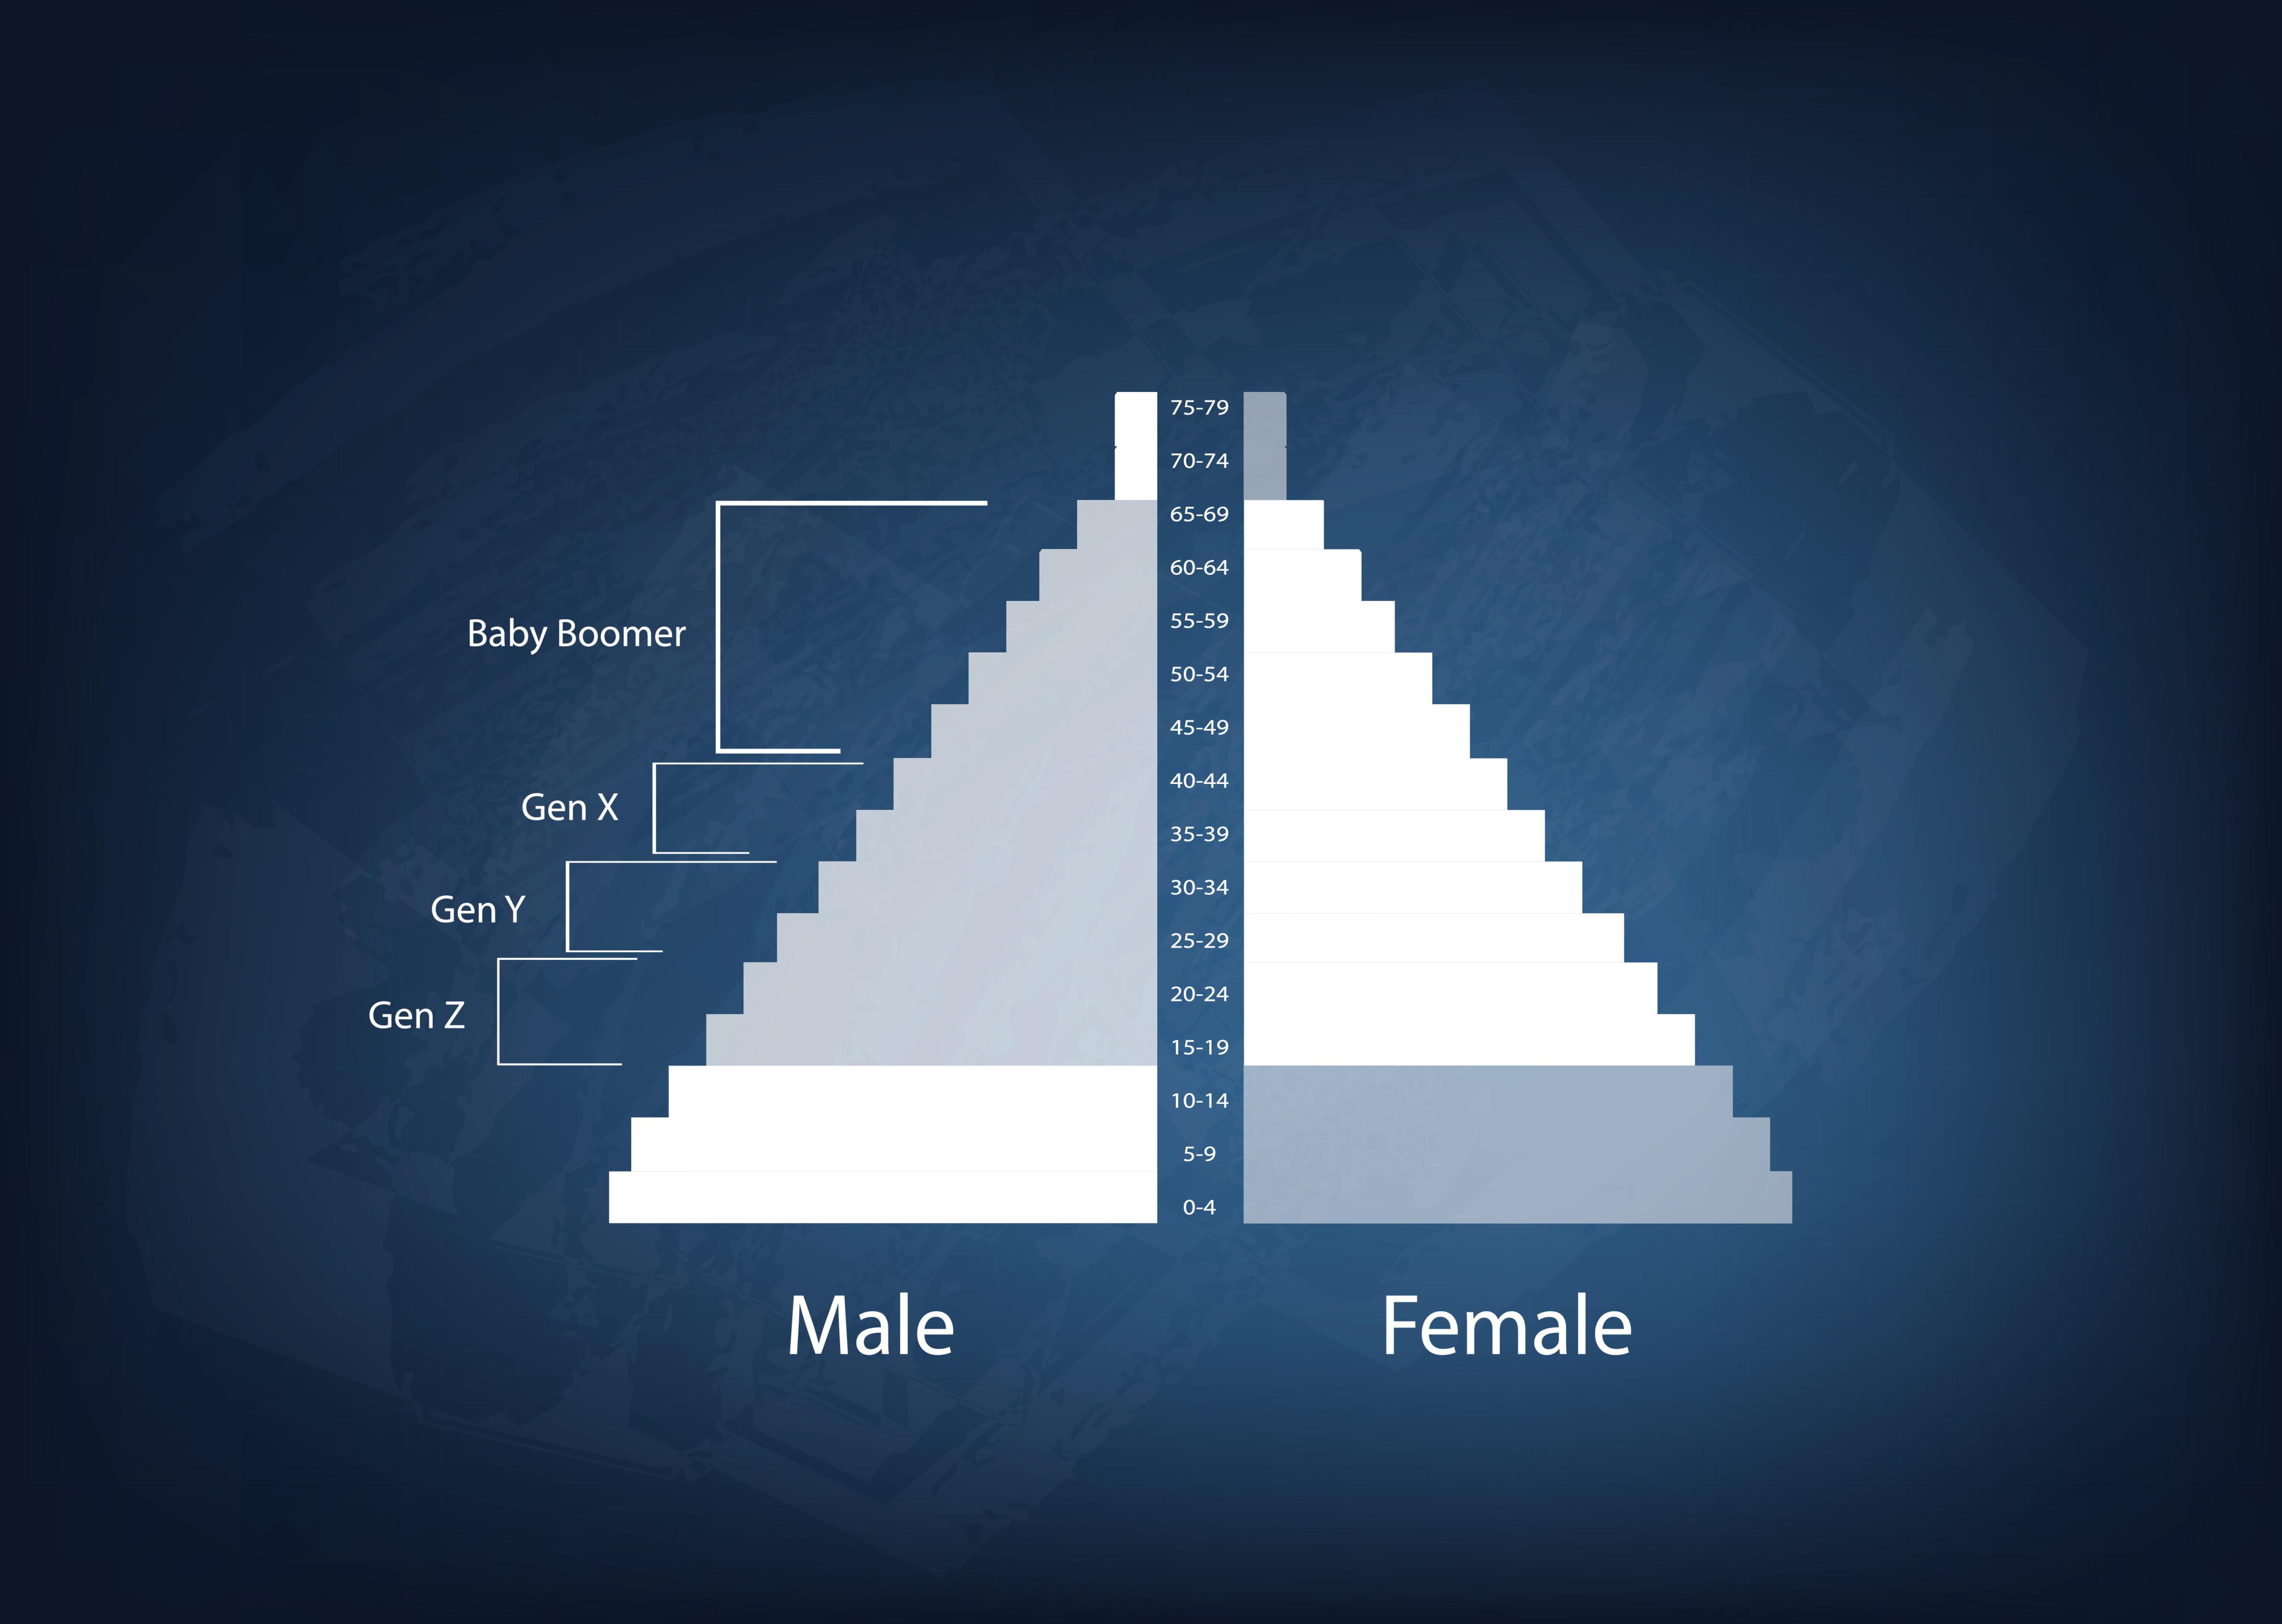 The average body shape of males and females in the sample. These